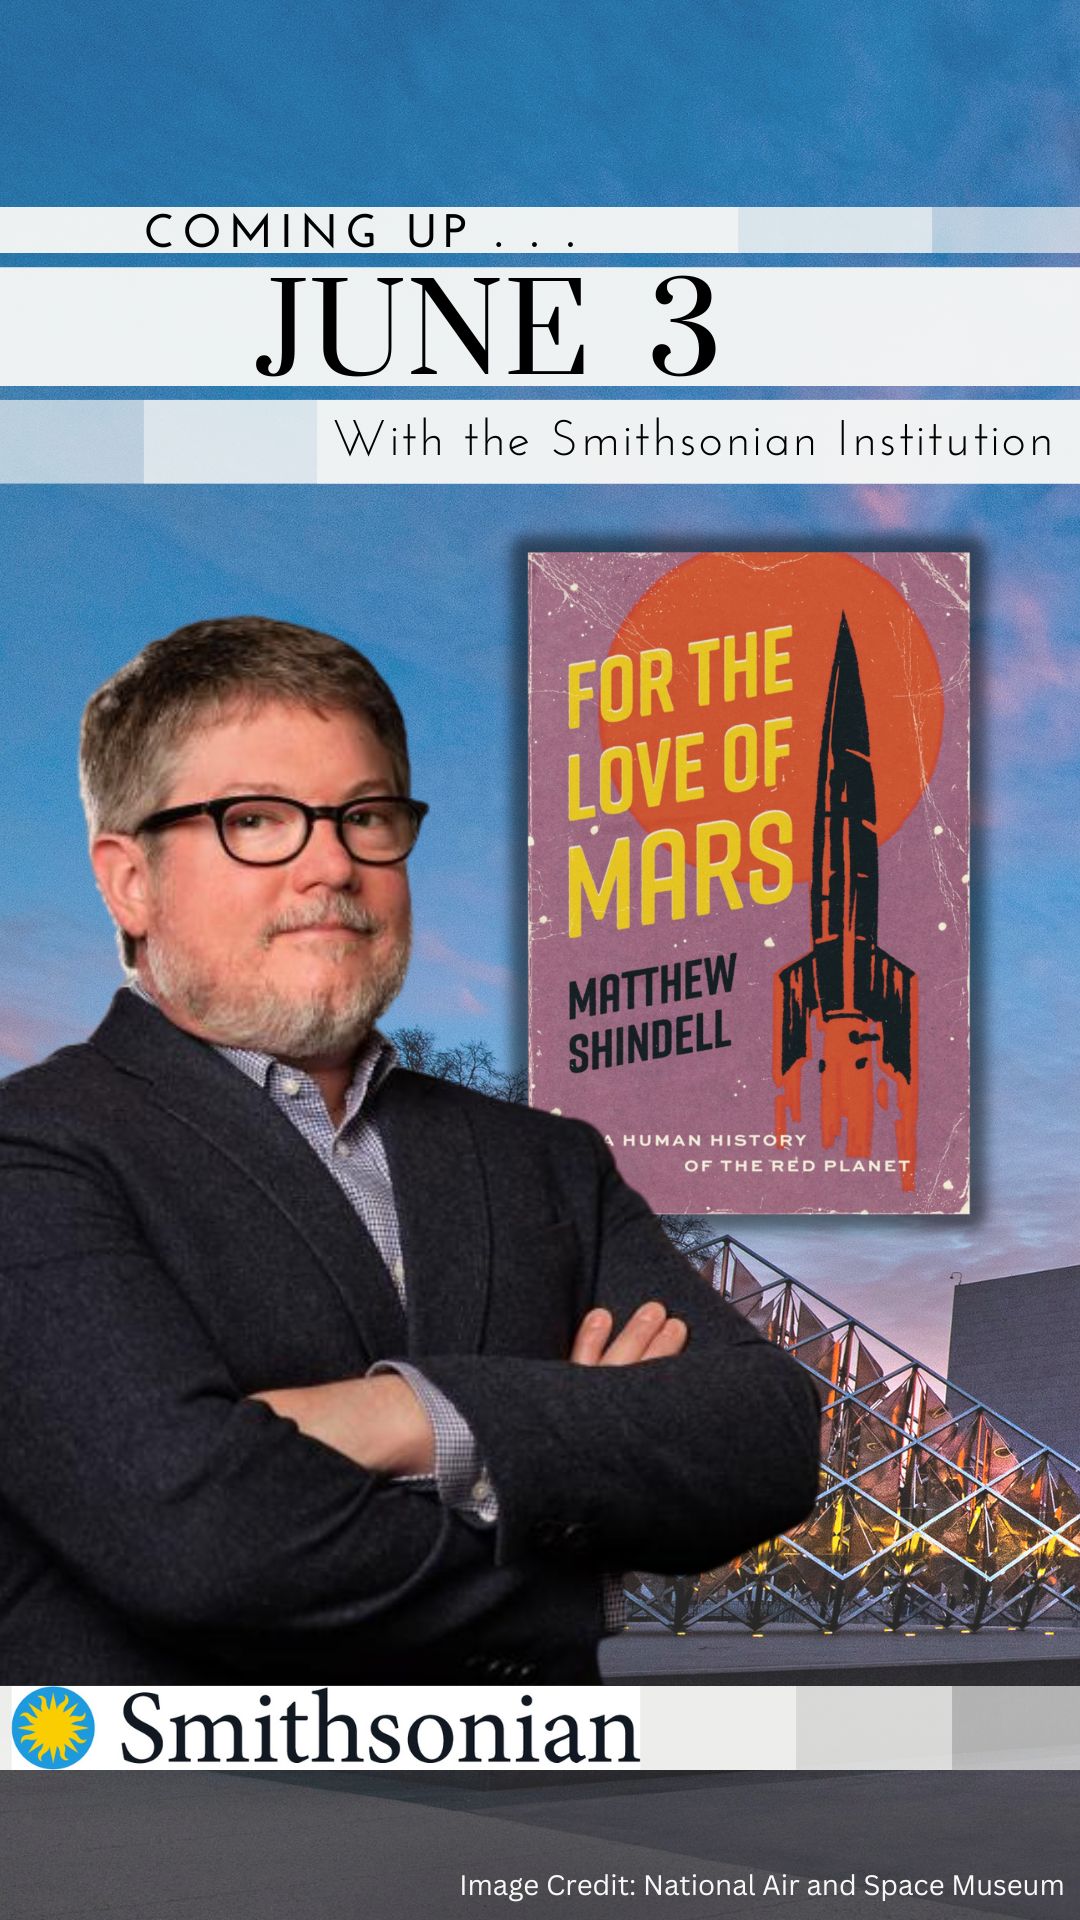 Coming soon June 3 with the Smithsonian Institution. Image of author Matt Shindell and the cover of his book "For the Love of Mars"